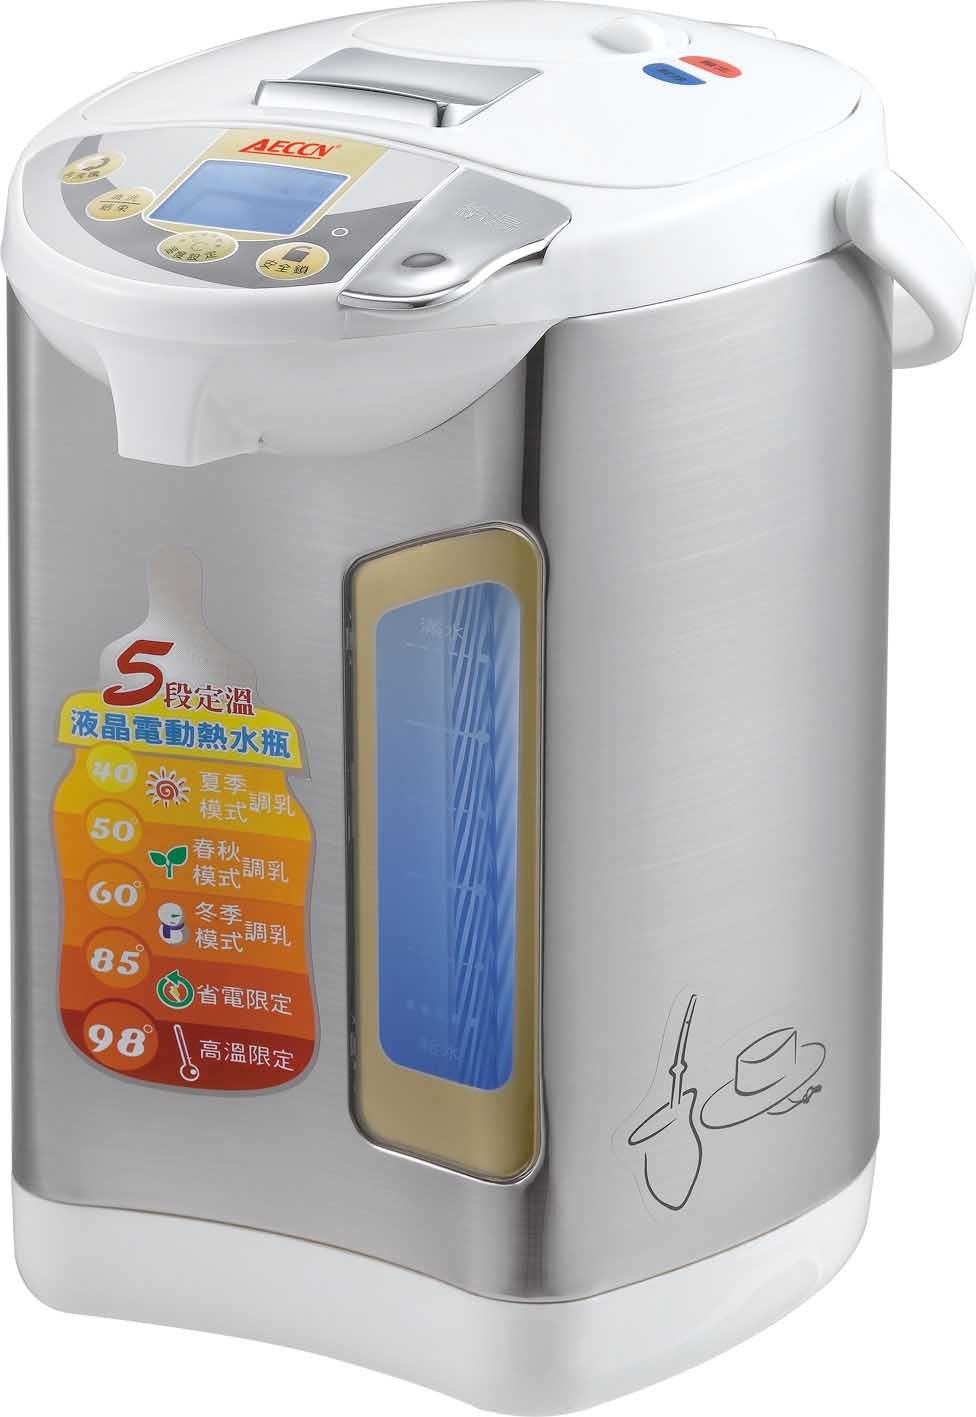 Multi-Function Electric Thermo Pot